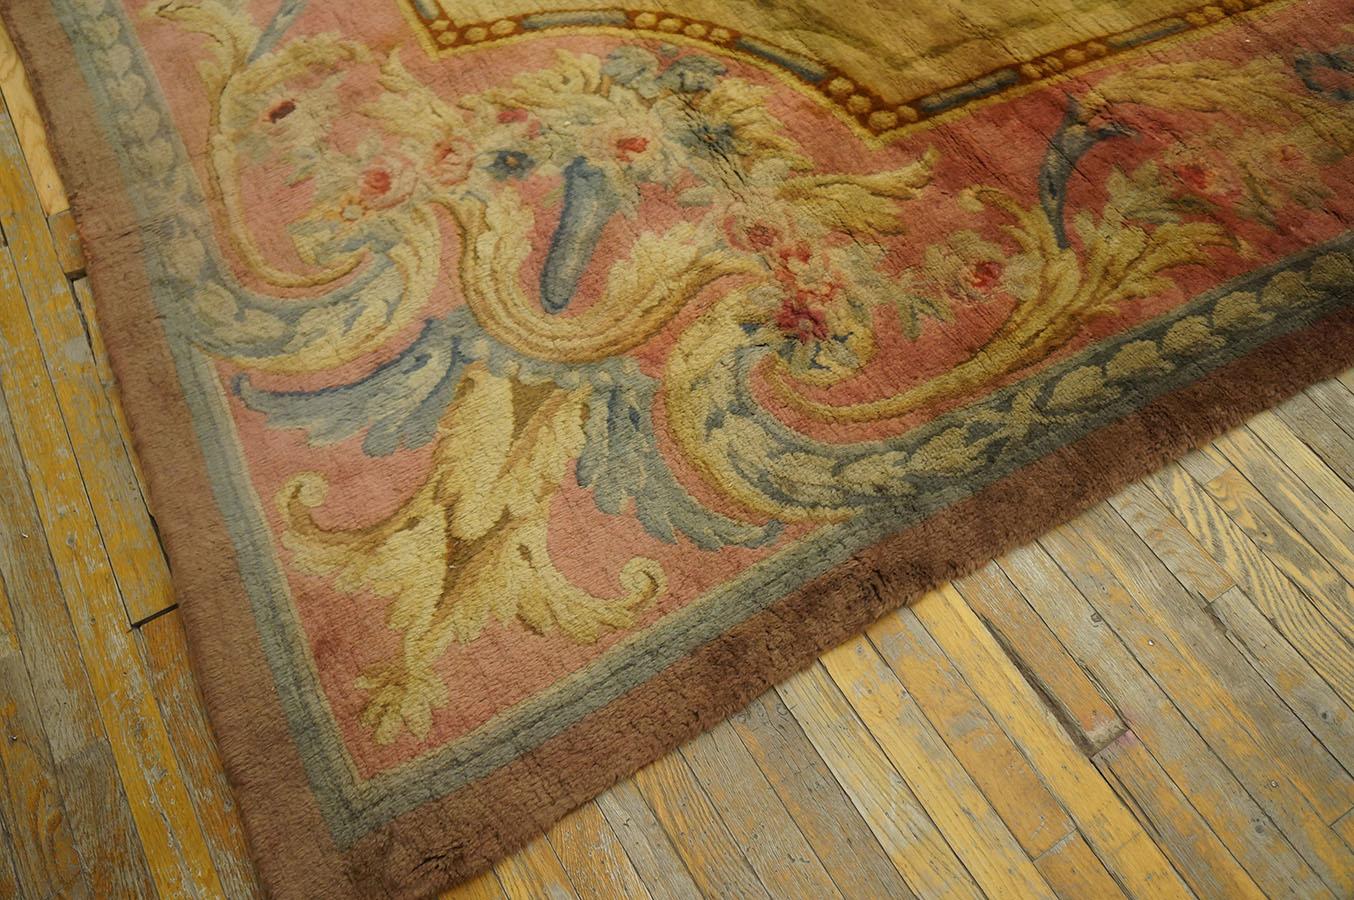 Late 19th Century French Savonnerie Carpet (12' 3'' x 21' - 375 x 640 cm ) For Sale 3